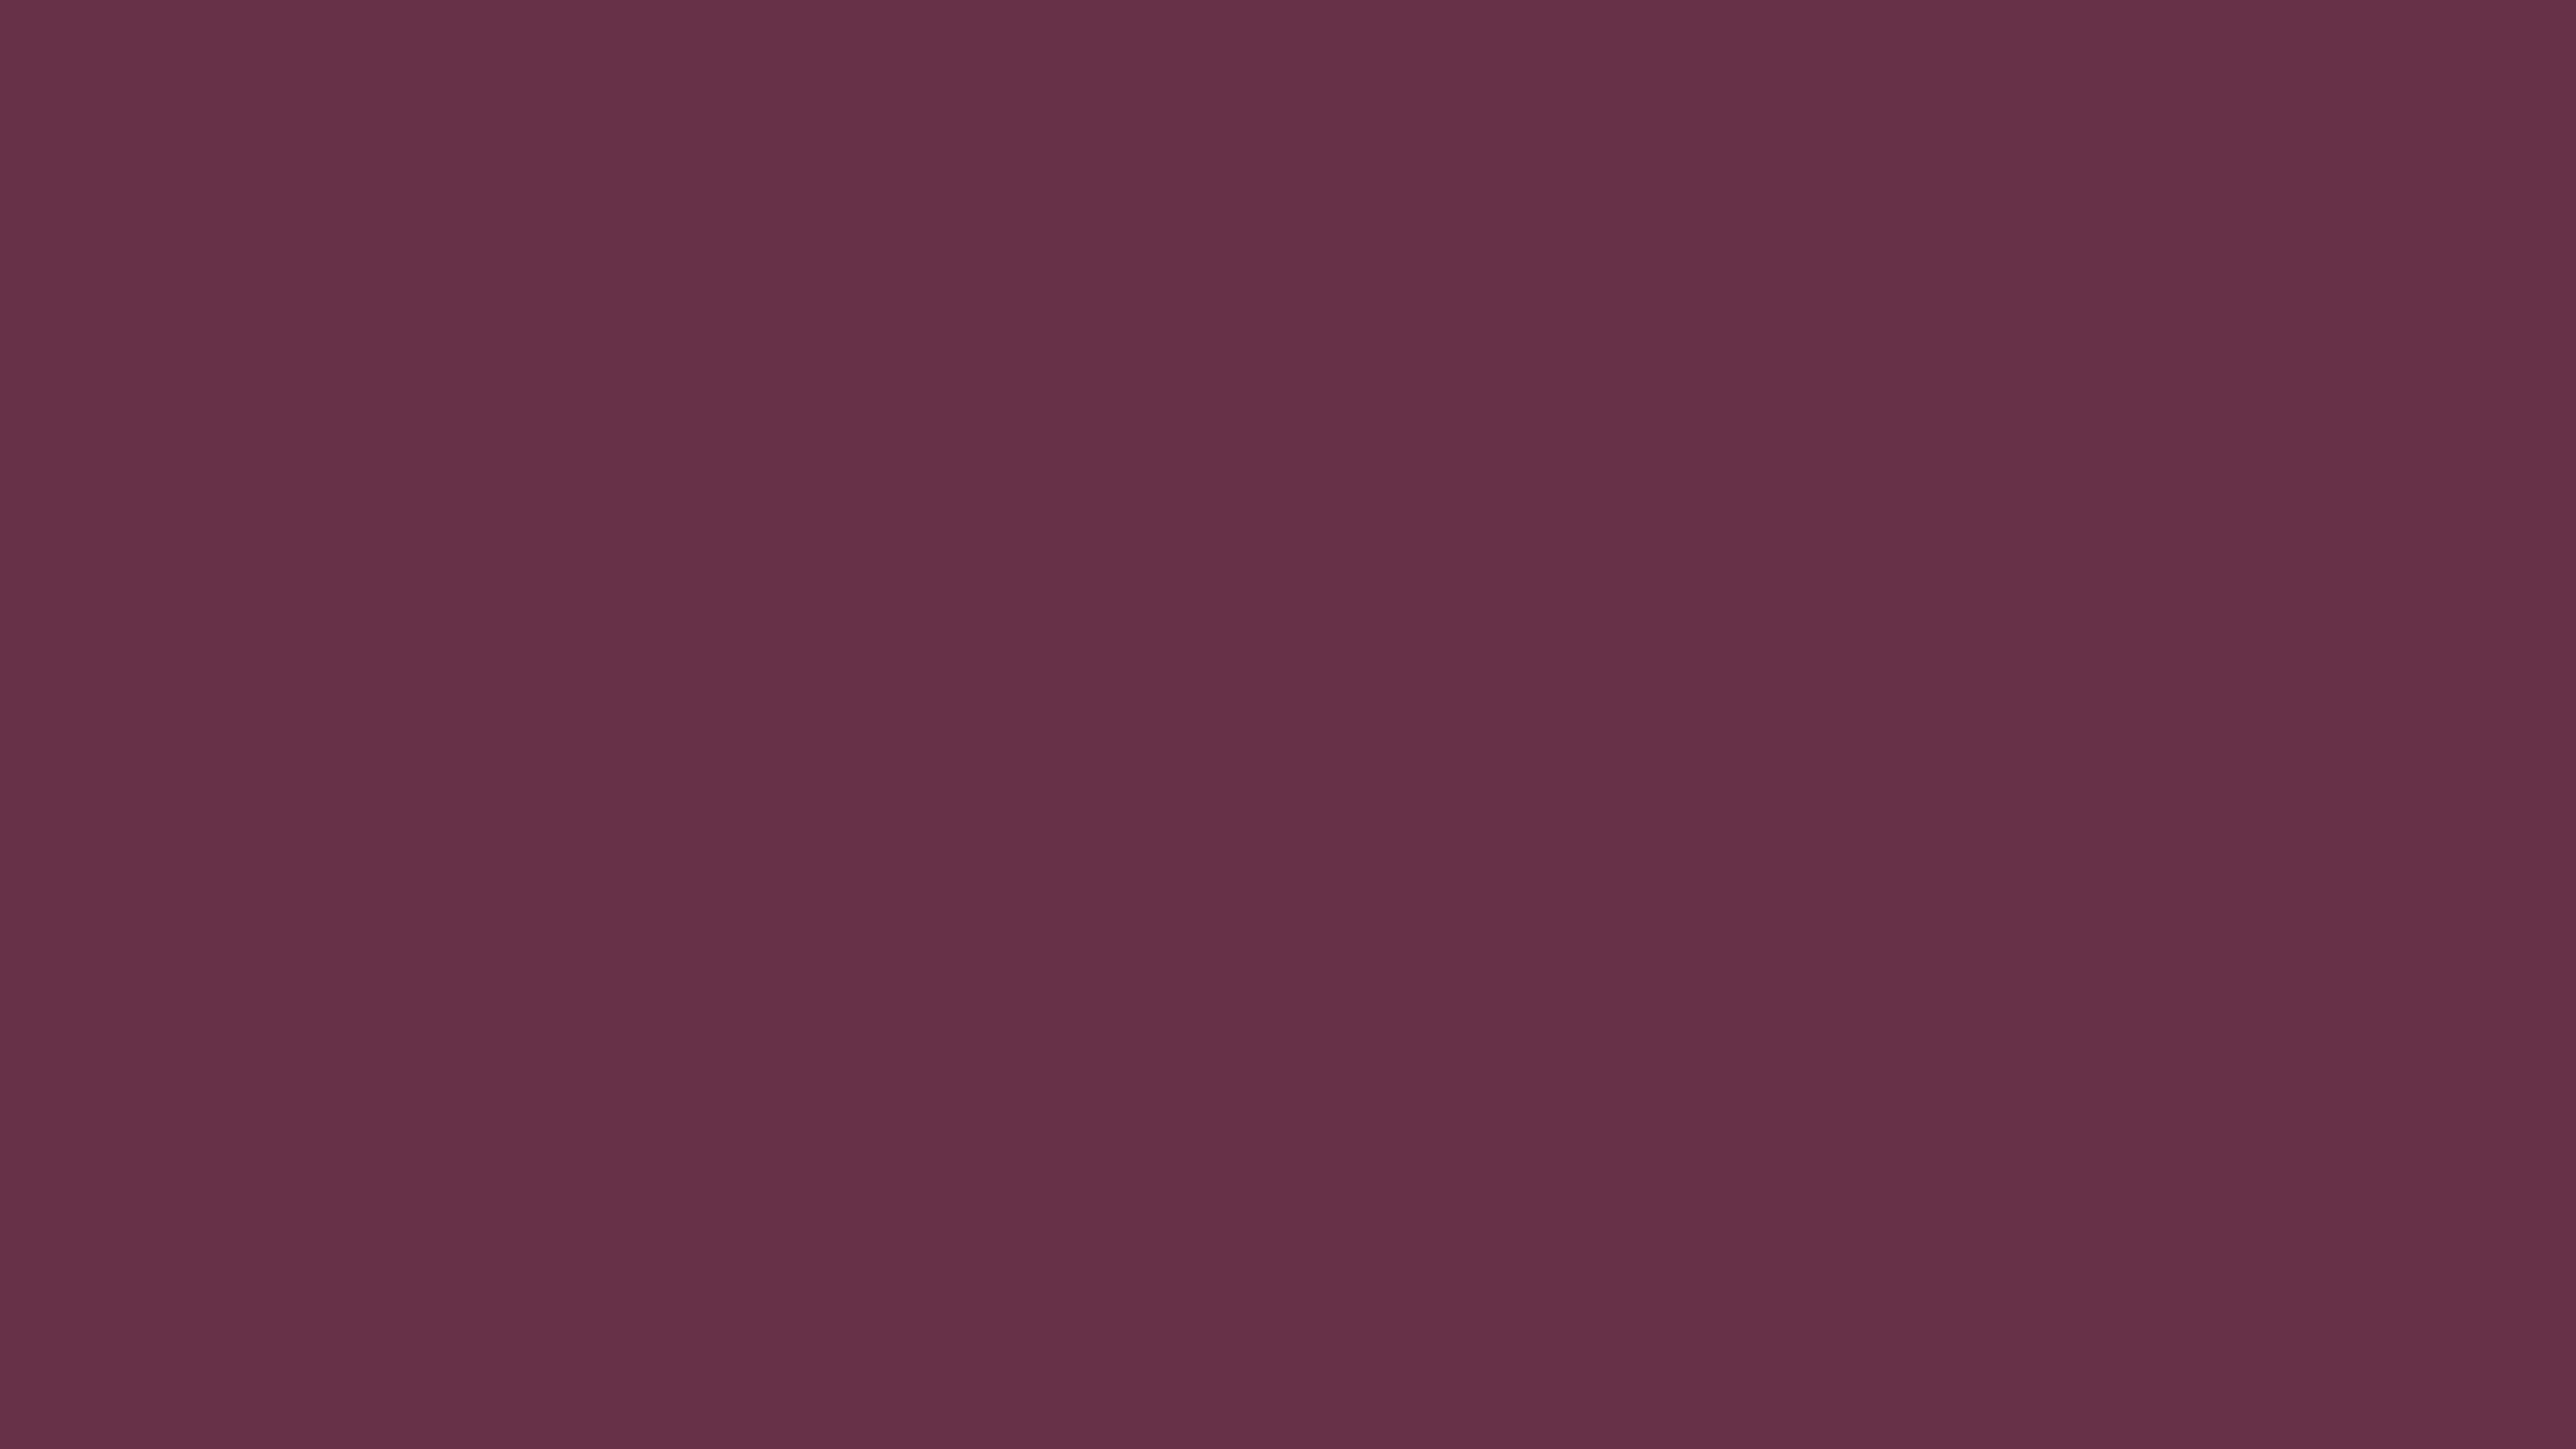 7680x4320 Old Mauve Solid Color Background